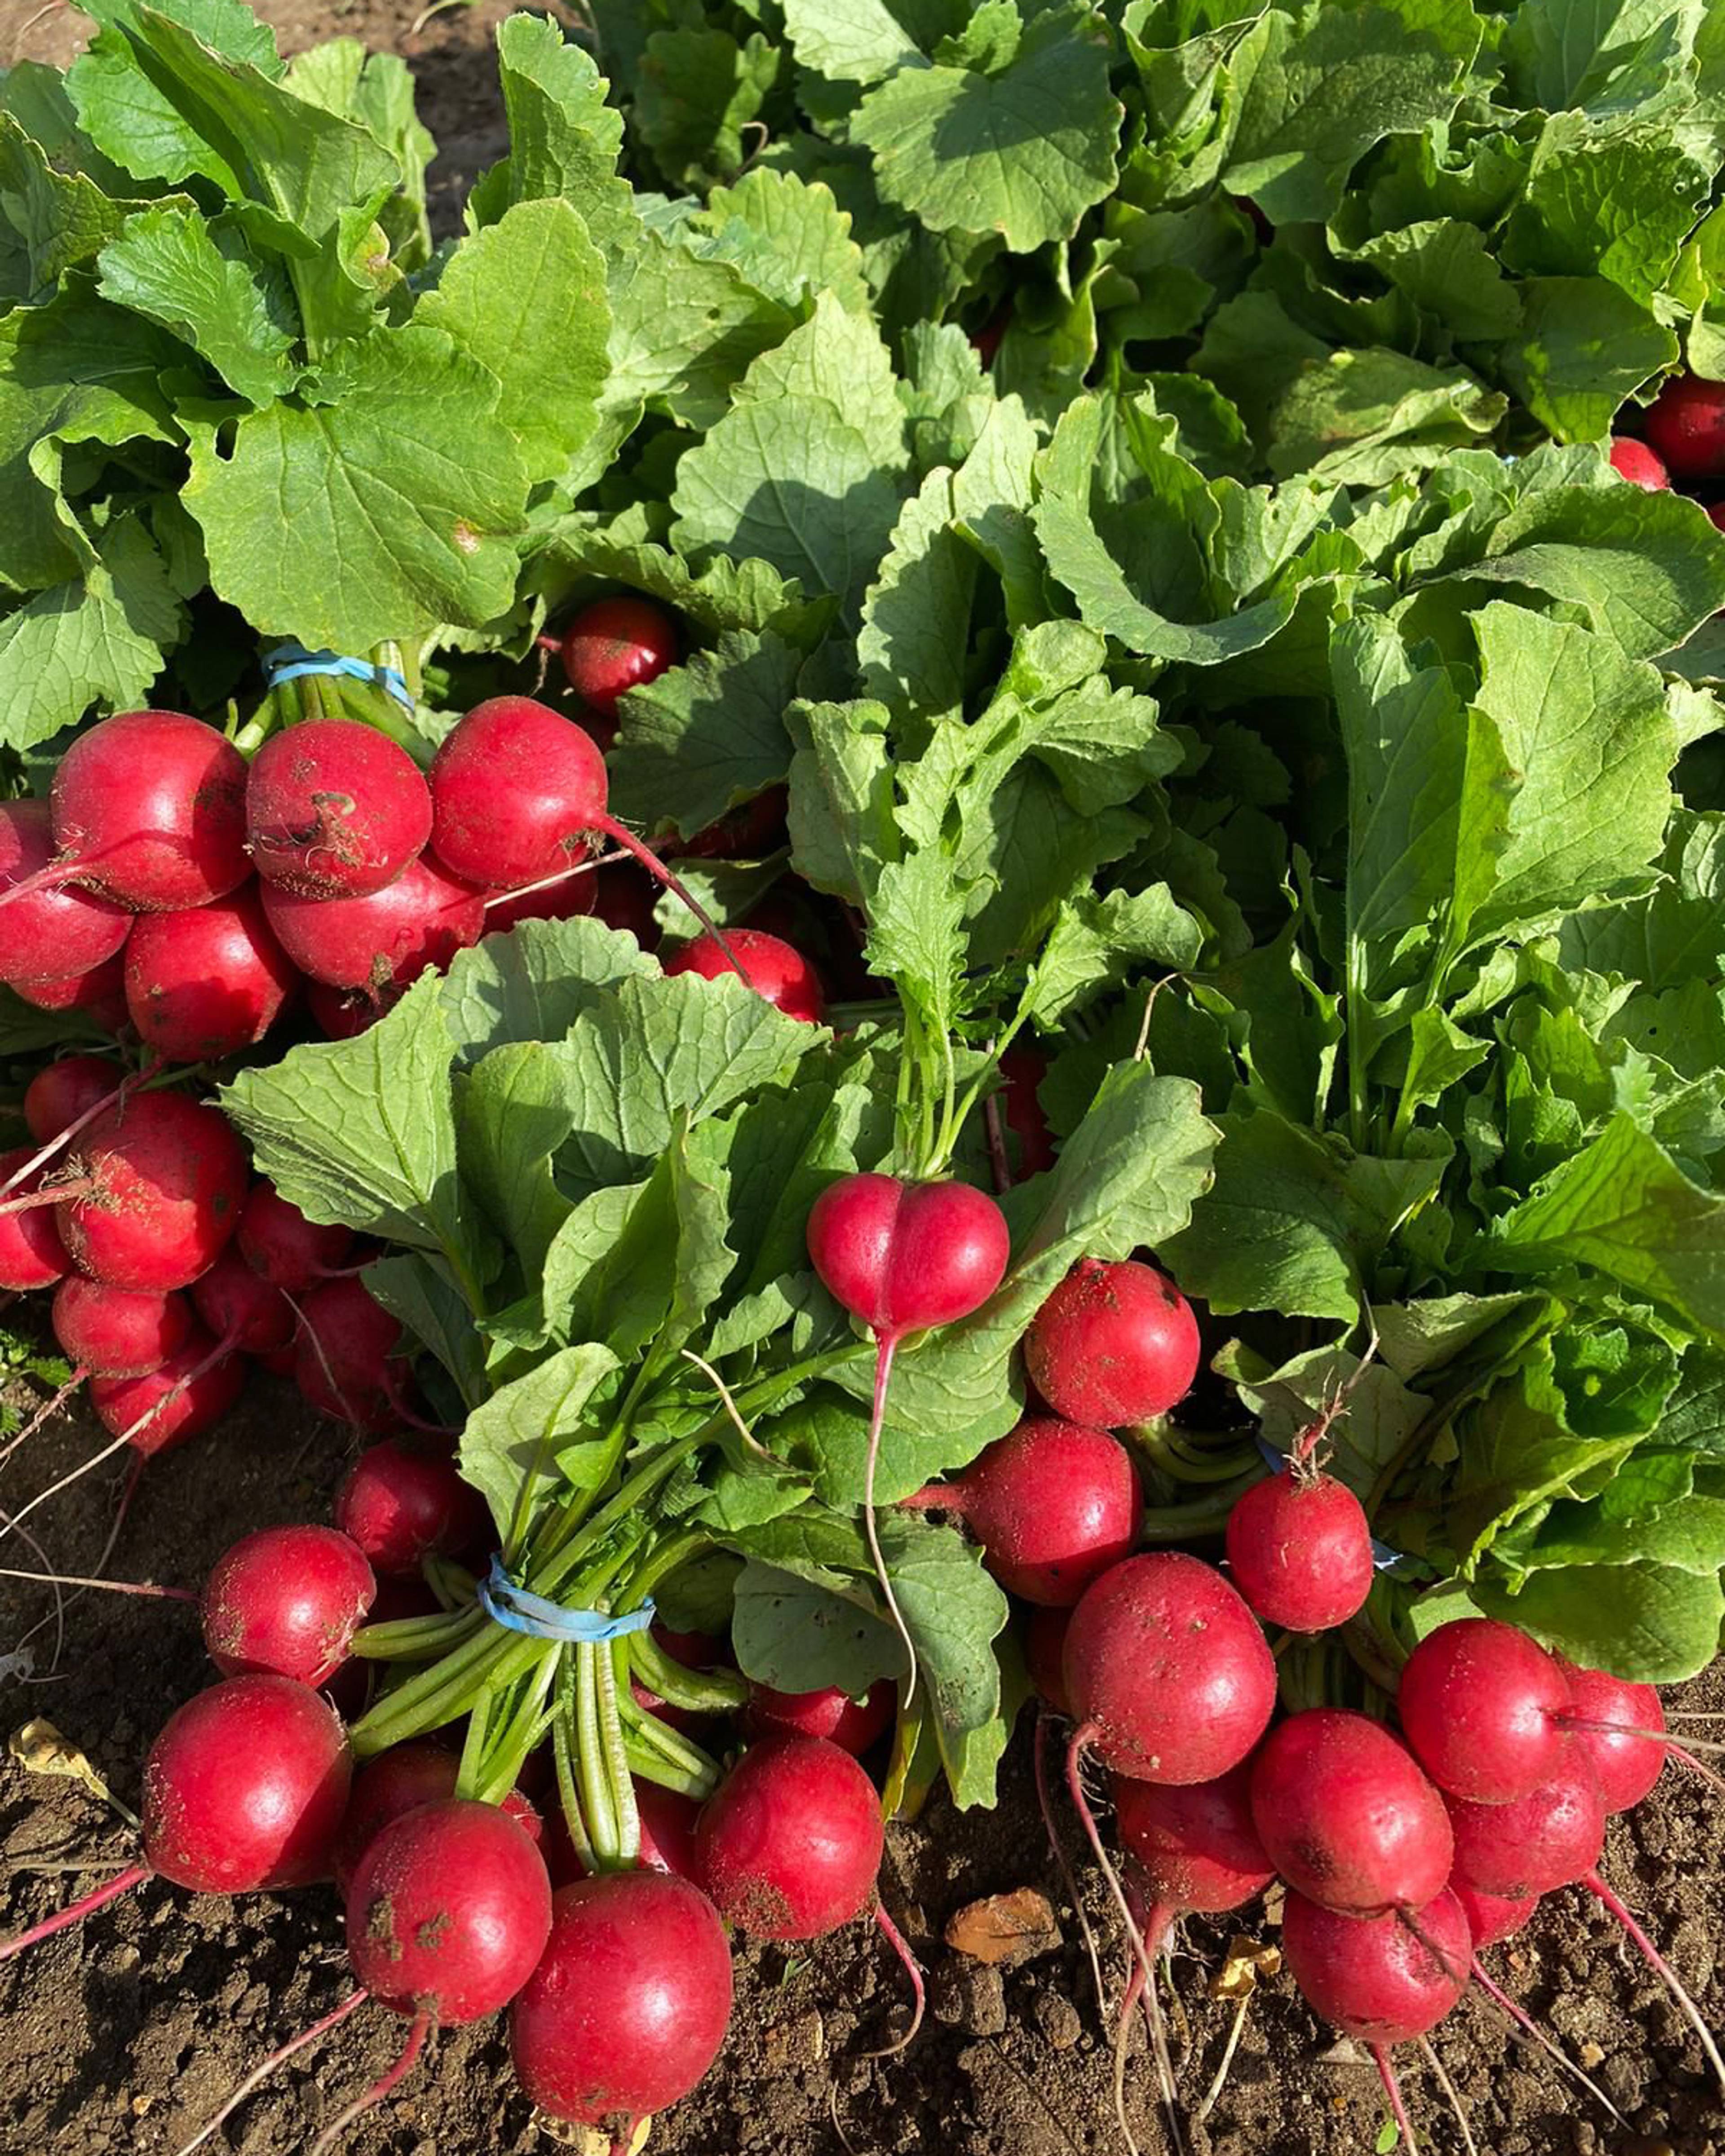 cherrybell radishes in bunches on the soil